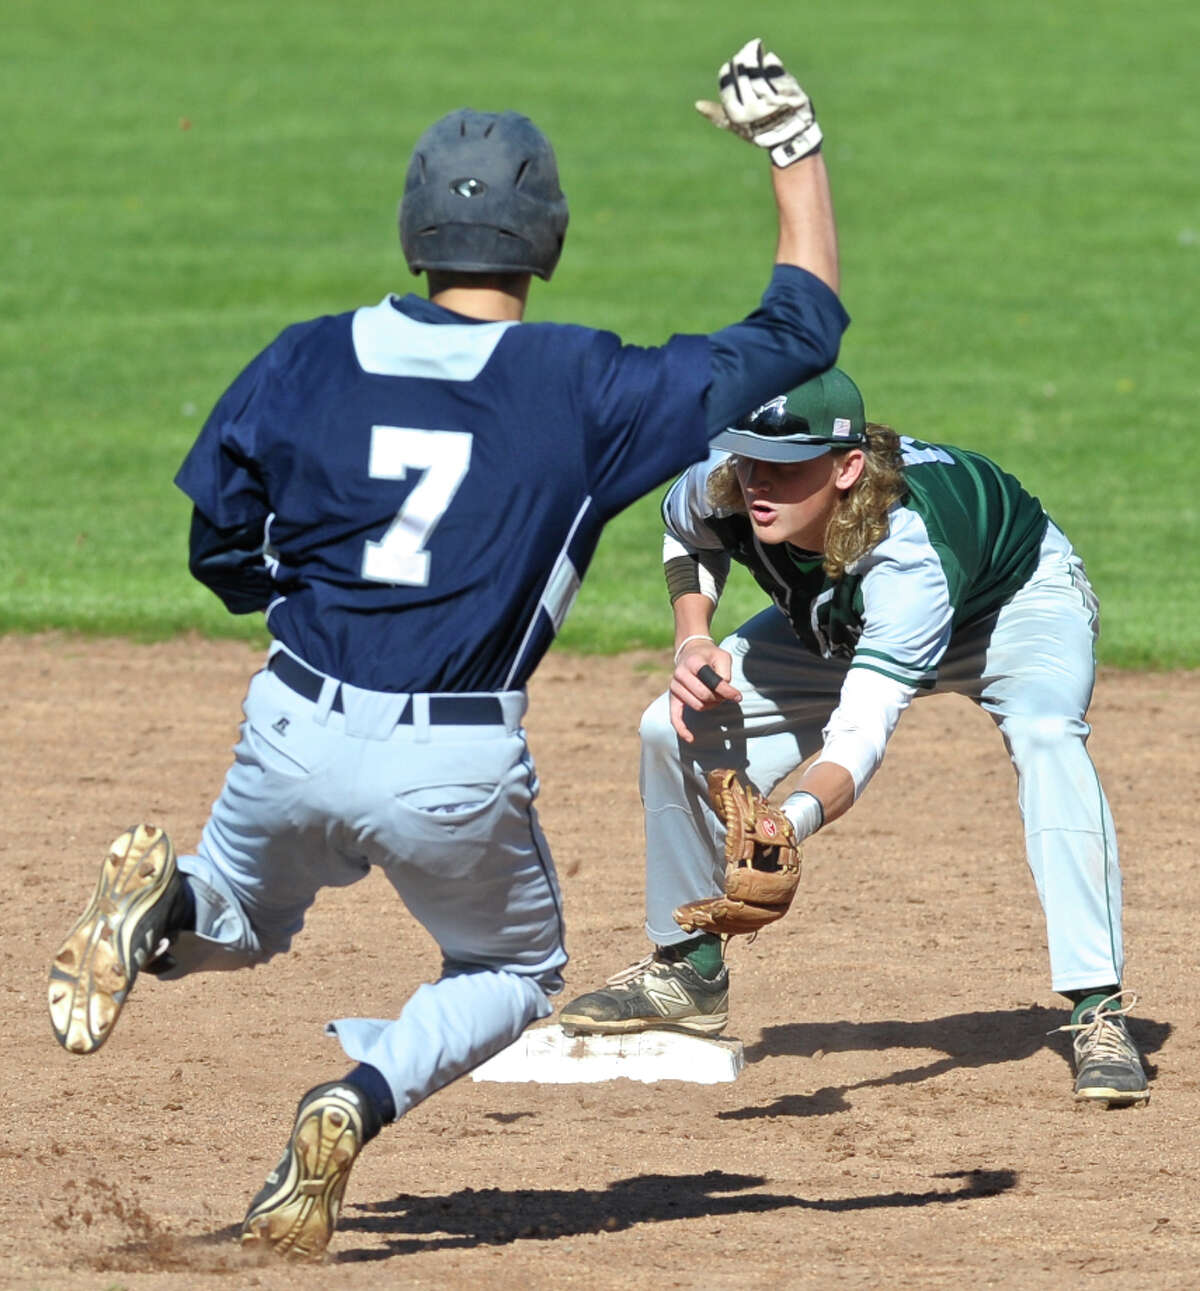 New Milford's Cooper Knight (6) reaches for the ball as Immaculate's James Fahey (7) slides into second in the SWC boys baseball game between New Milford and Immaculate high schools, on Wednesday afternoon, April 27, 2016, at Immaculate High School, in Danbury, Conn. Fahey was out at second.